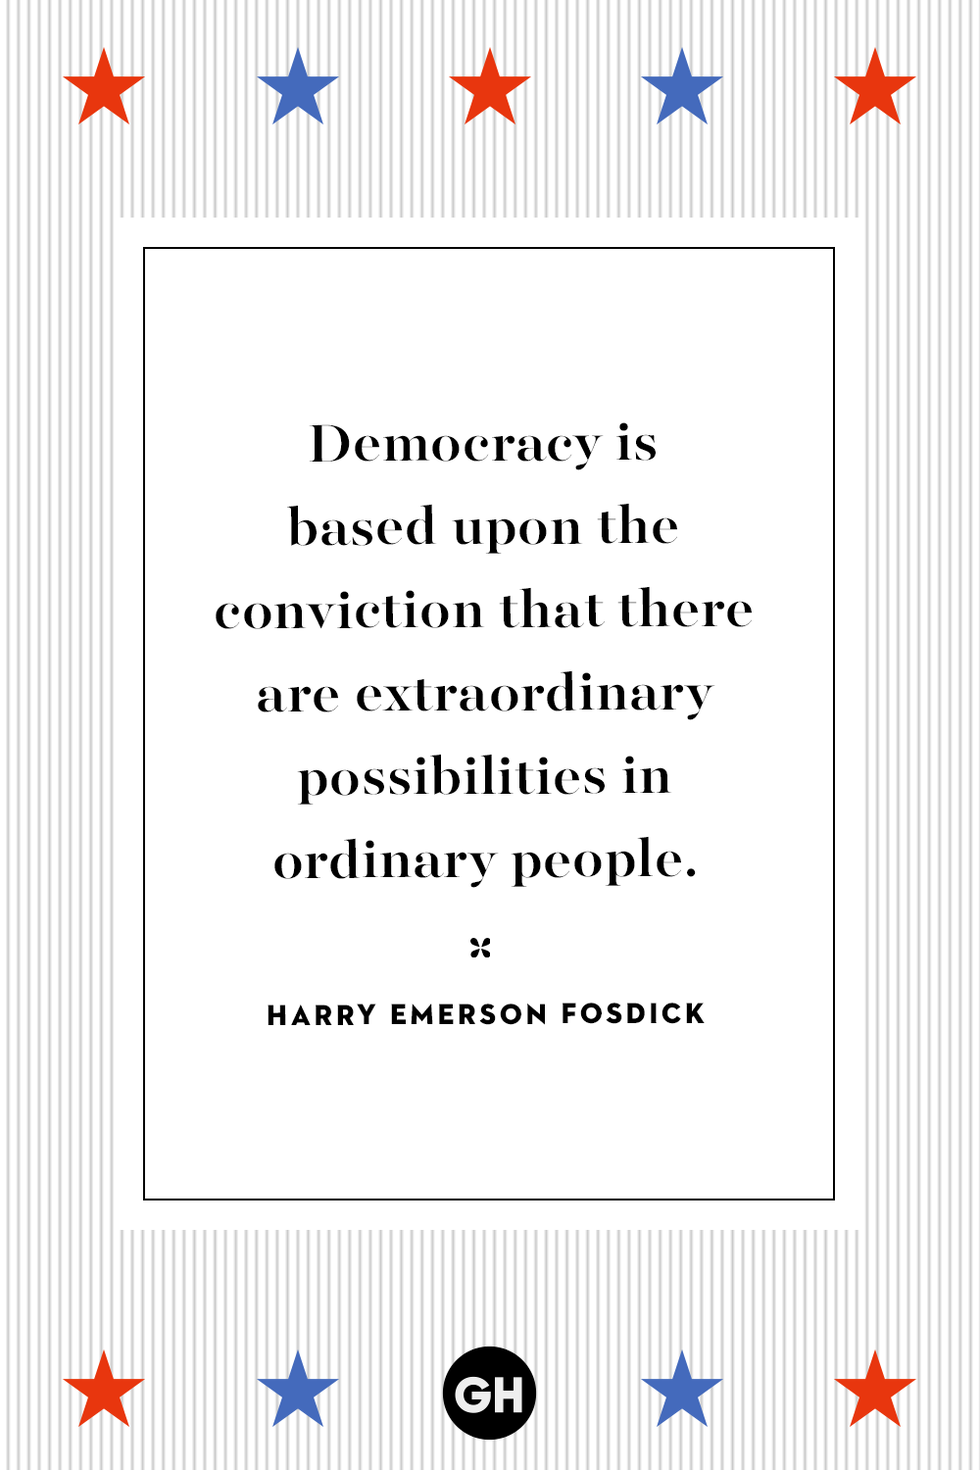 Voting quotes - election quotes - Harry Emerson Fosdick